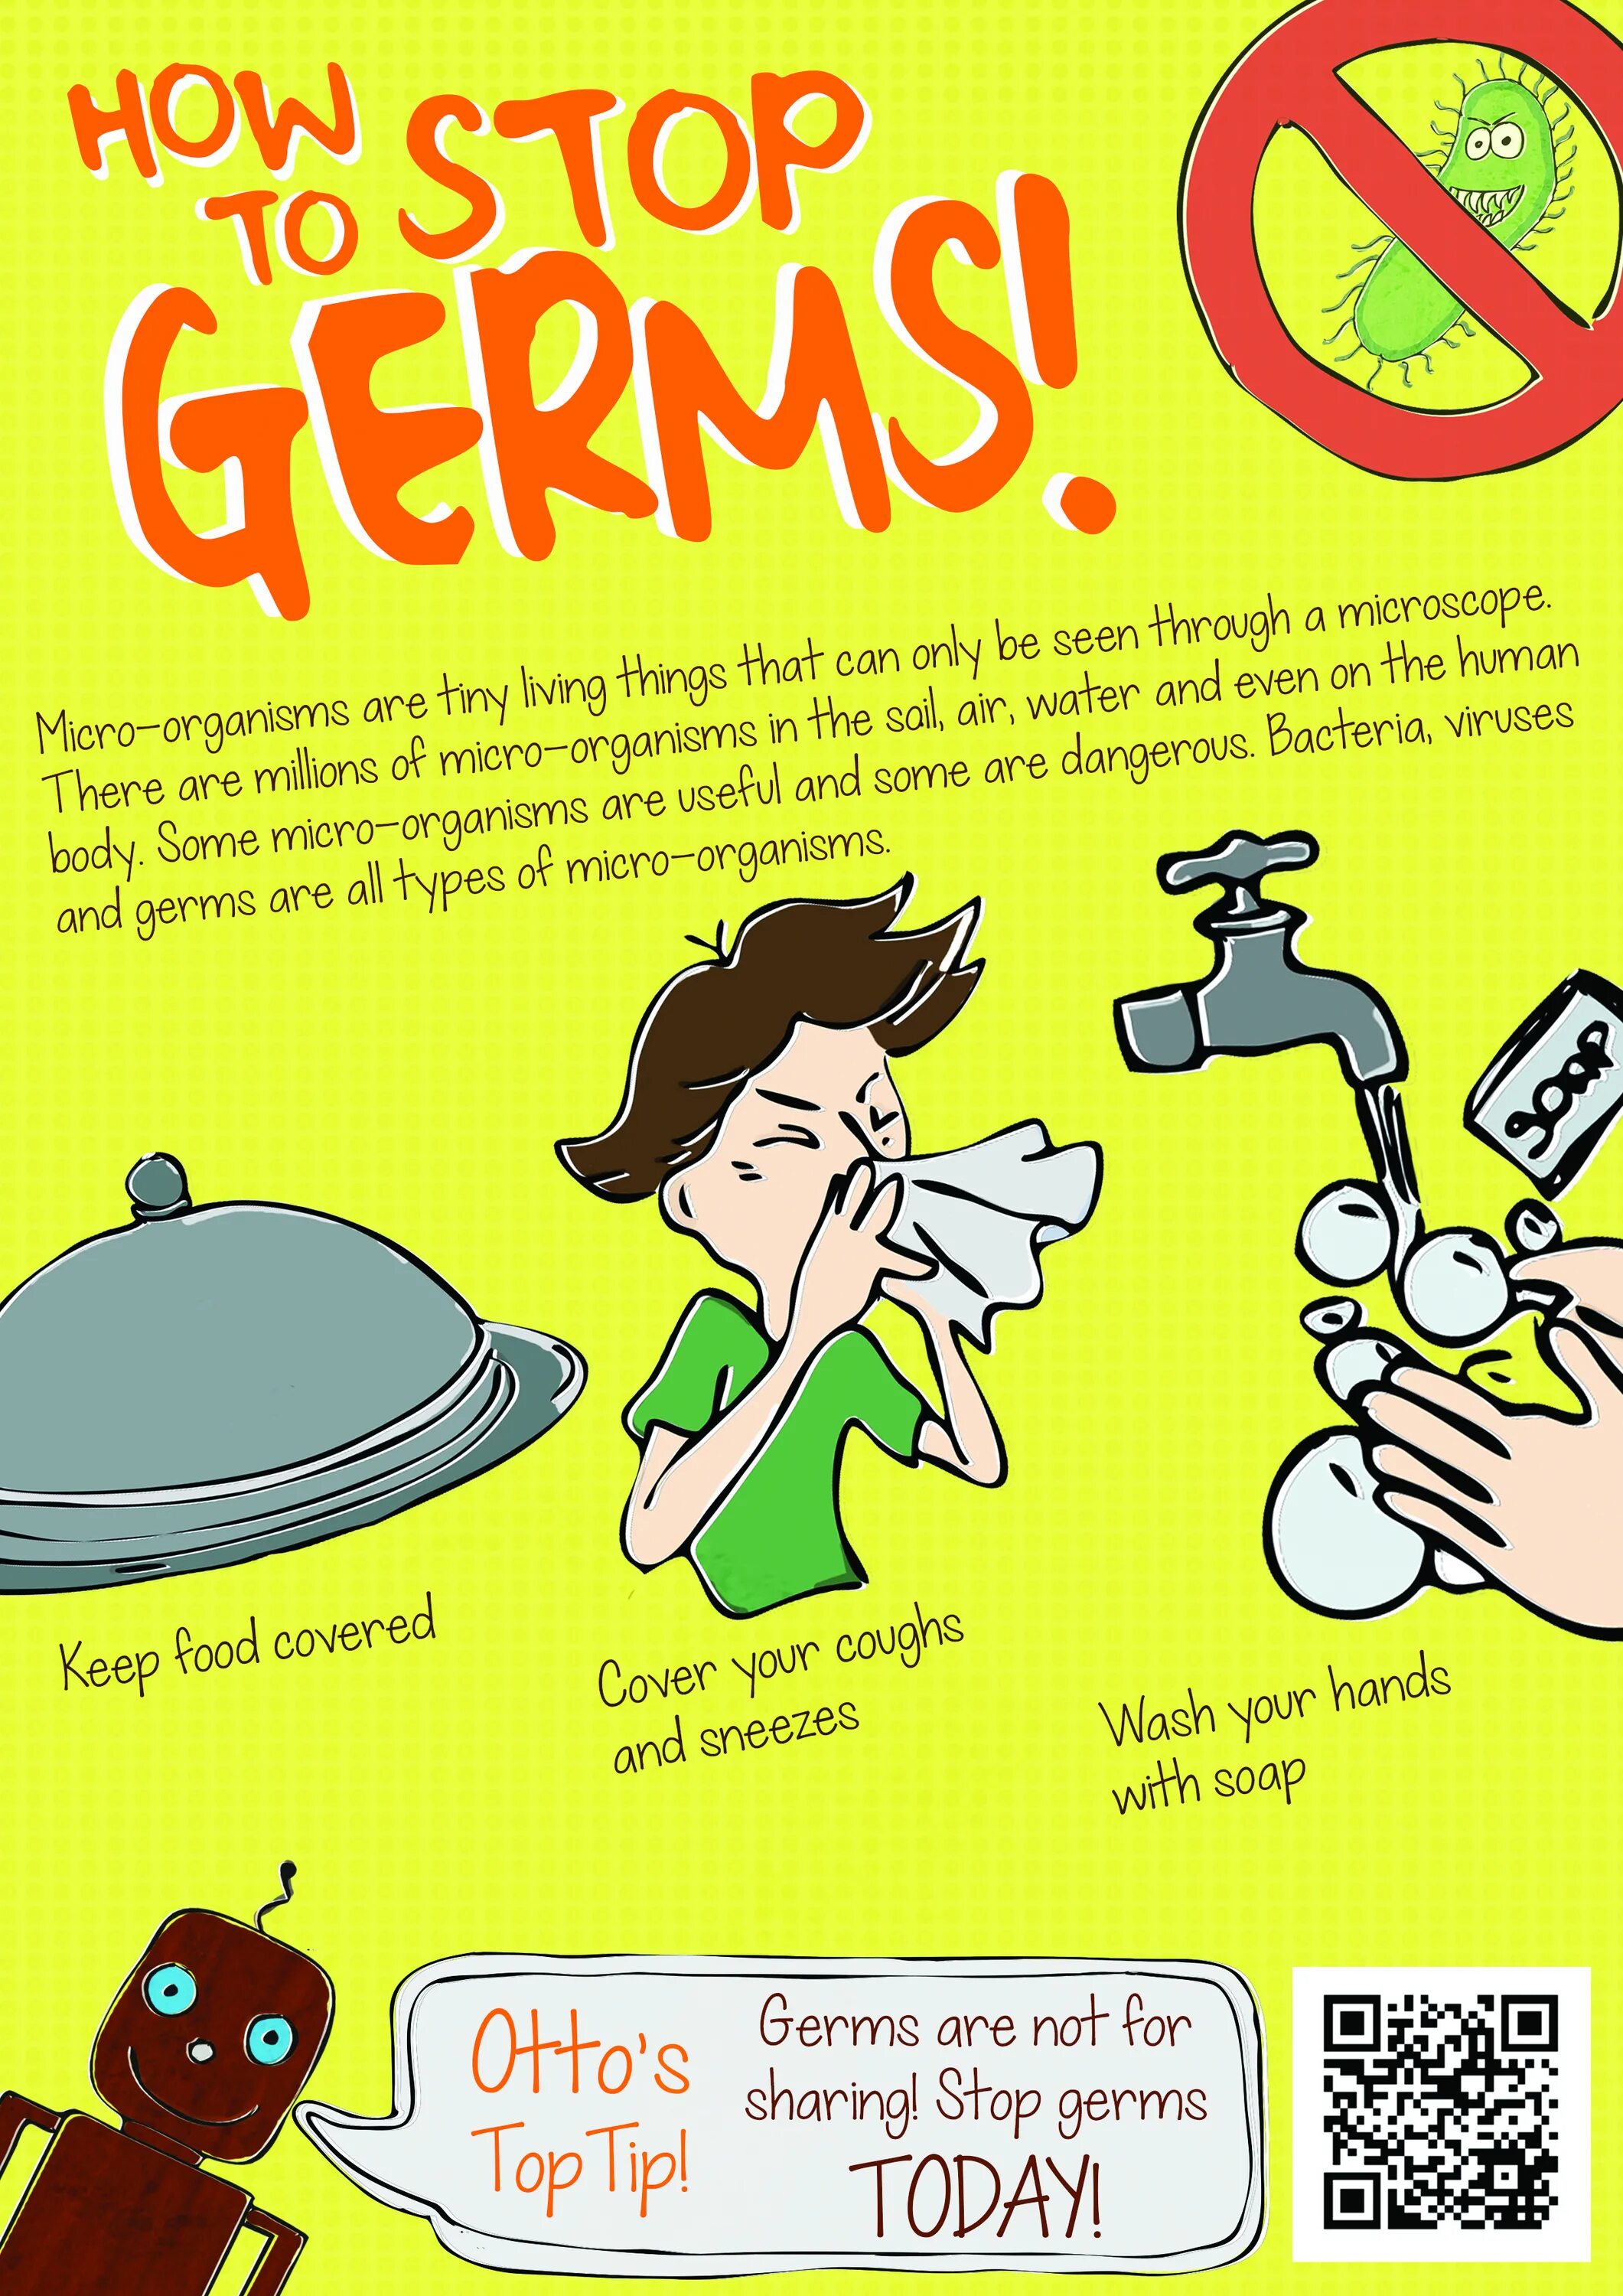 Germs 1999 игра. About Germs. How to stop Germs poster. What are Germs? Книга цена. Germs перевод